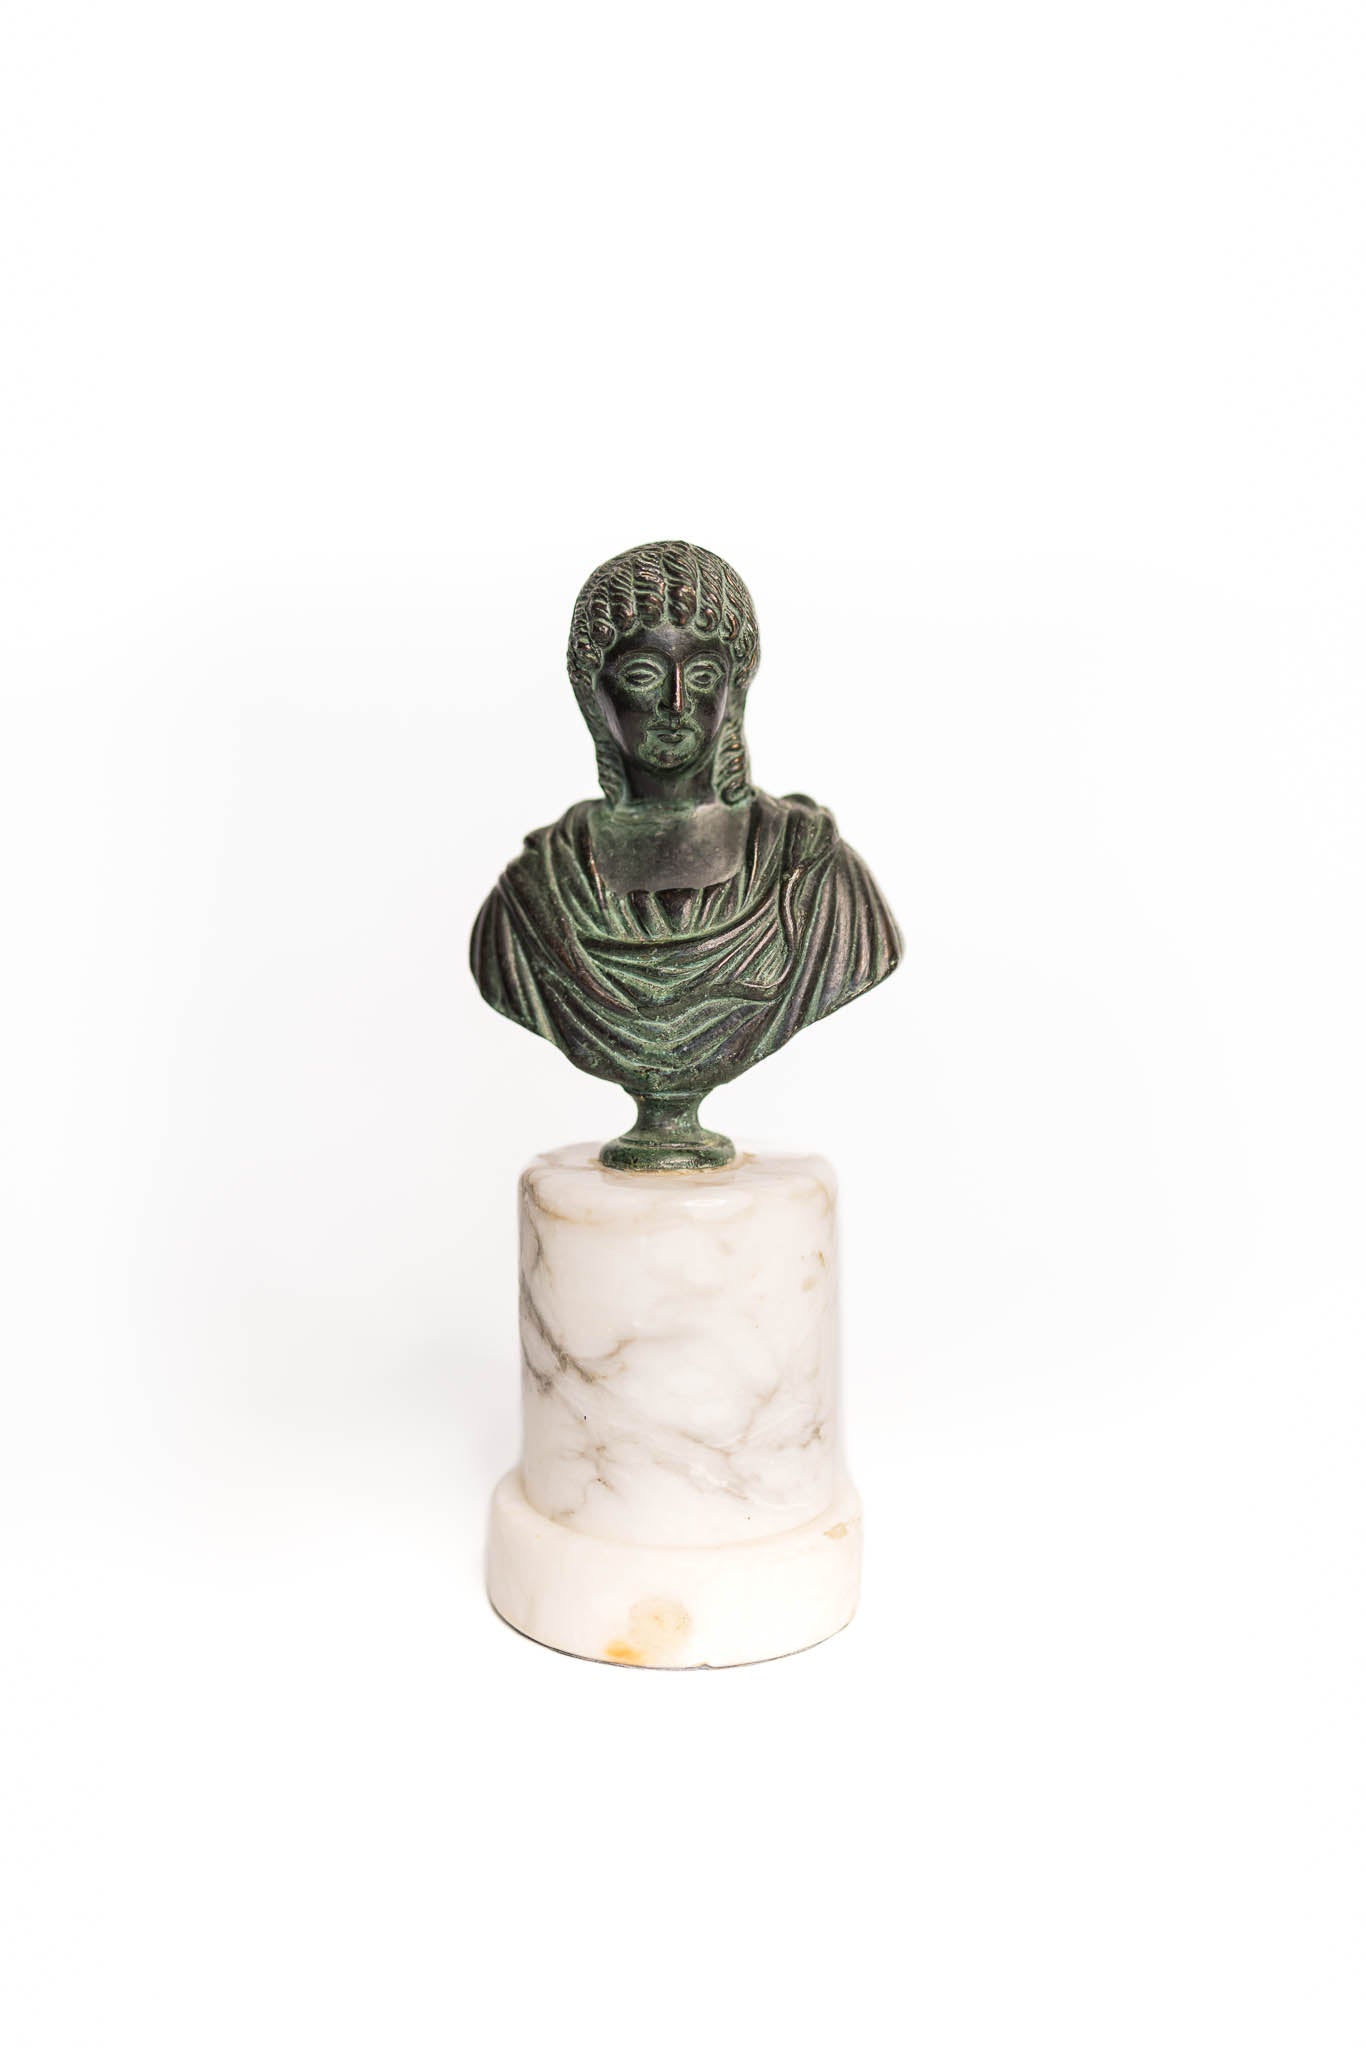 Greco - Roman Style Statue Composed of Marble and Bronze